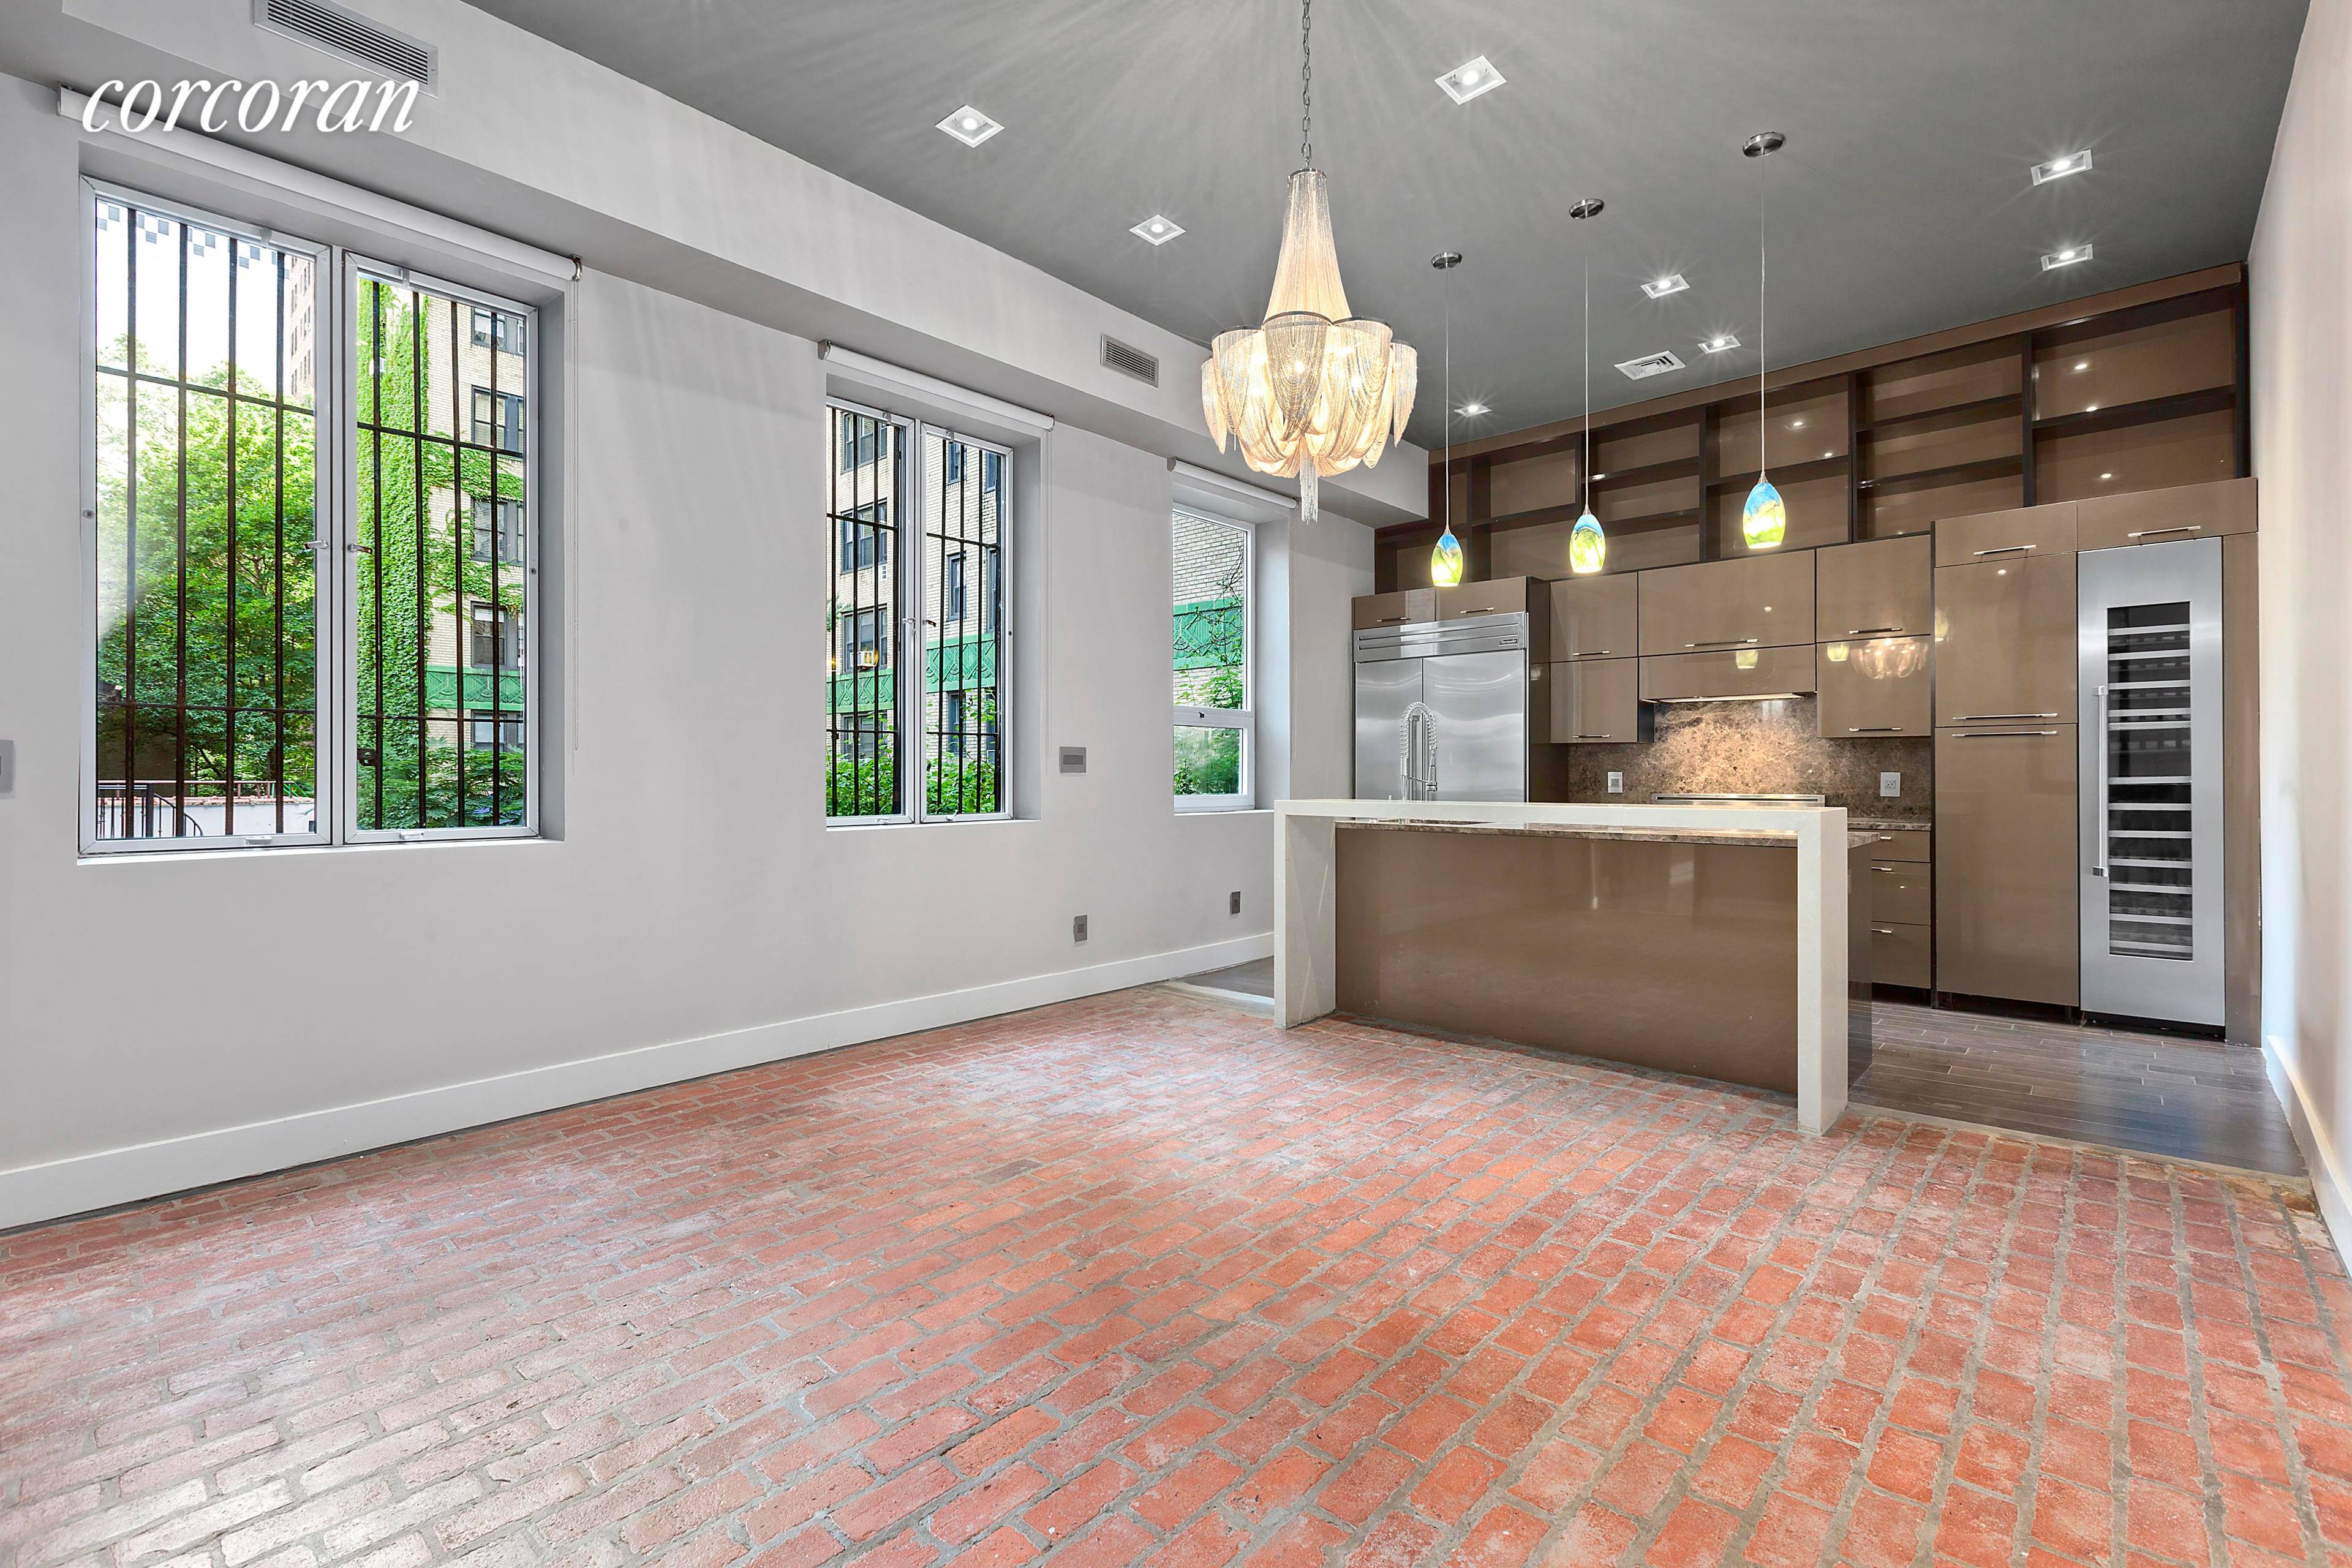 Get ready to be enamored with this one of a kind single family Upper East Side townhouse with 4 bedrooms, 4.